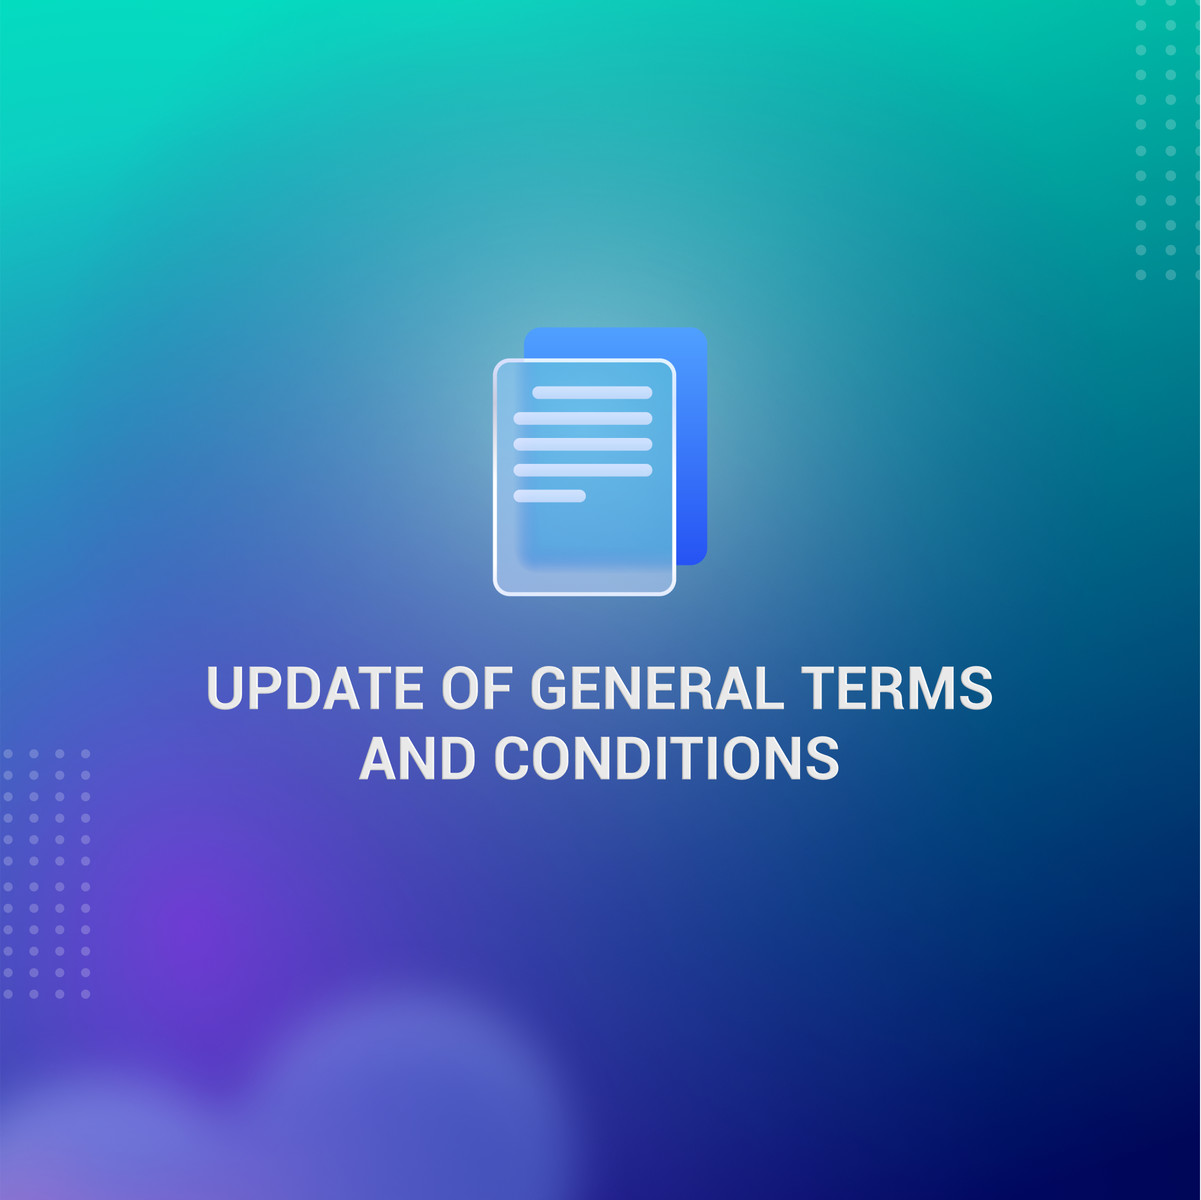 Update of ABA General Terms and Conditions